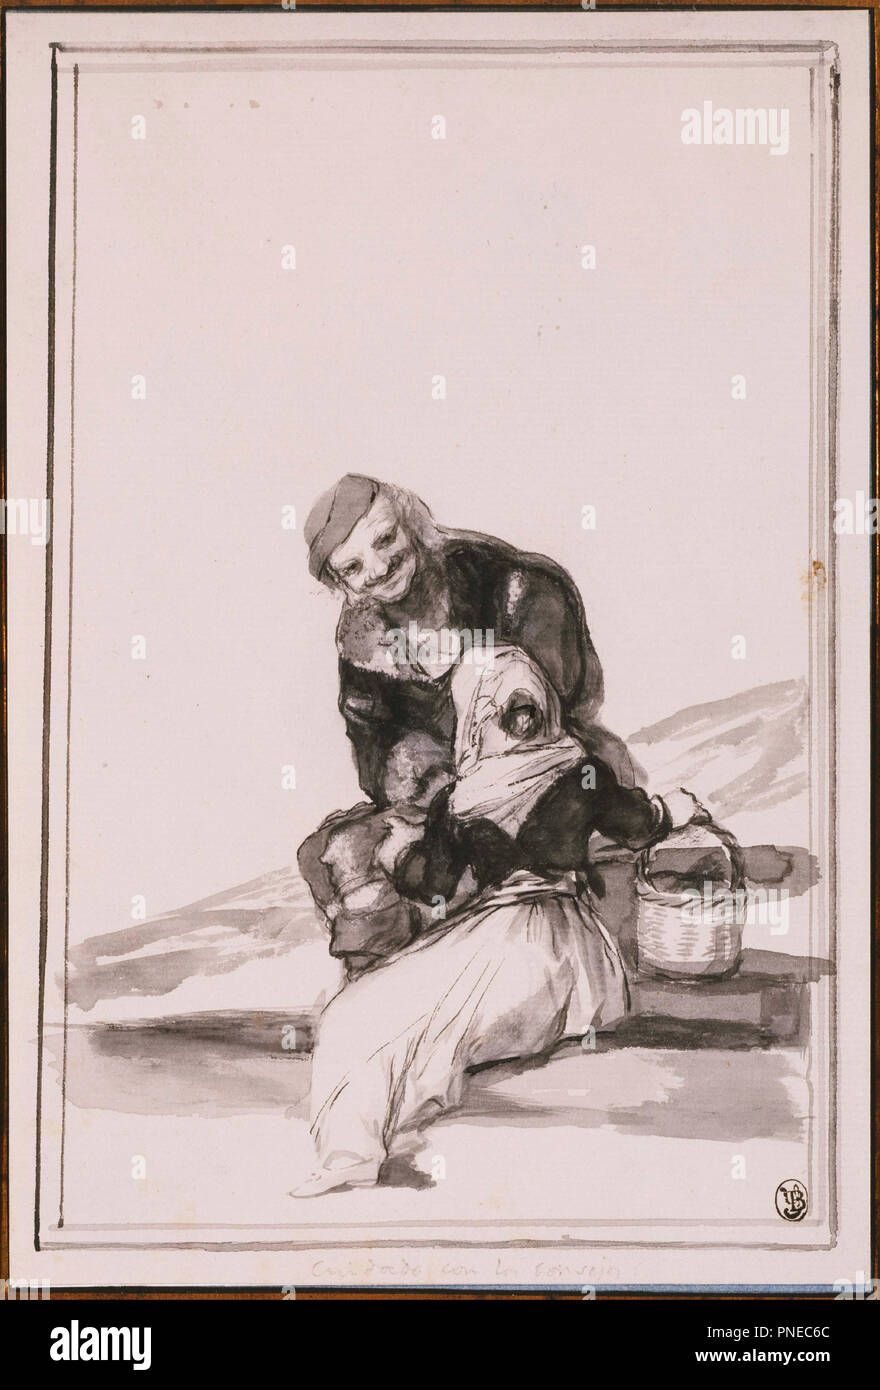 Beware of the Advice. Date/Period: Ca. 1806-1812. Works on Paper. Pen and ink and wash on paper. Height: 10 mm (0.39 in); Width: 6.75 mm (0.26 in). Author: FRANCISCO JOSE DE GOYA. Stock Photo